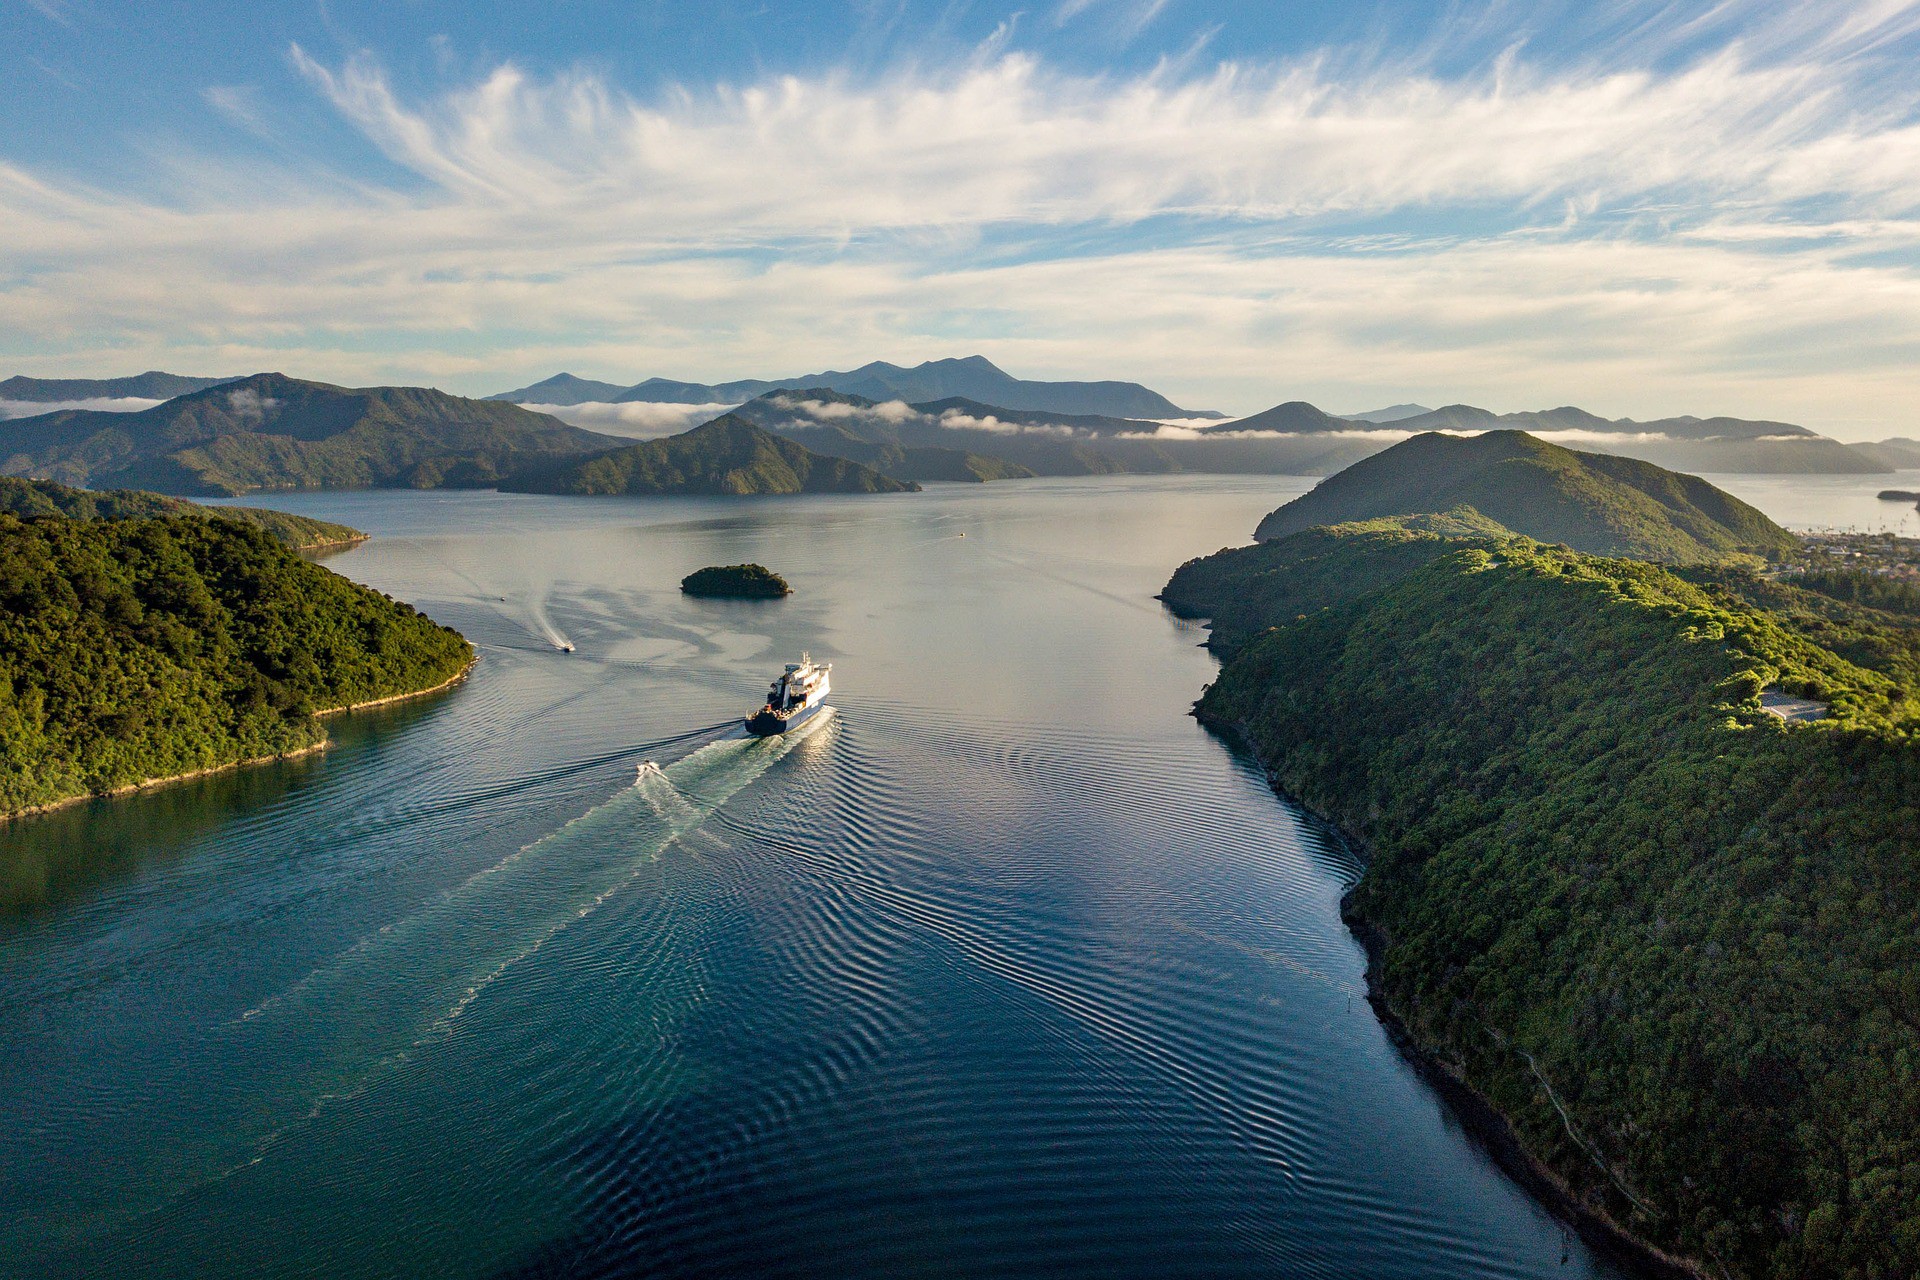 ferry-travelling-through-the-sea-beside-beautiful-green-mountains-crossing-the-cook-strait-at-sunset-new-zealand-bucket-list